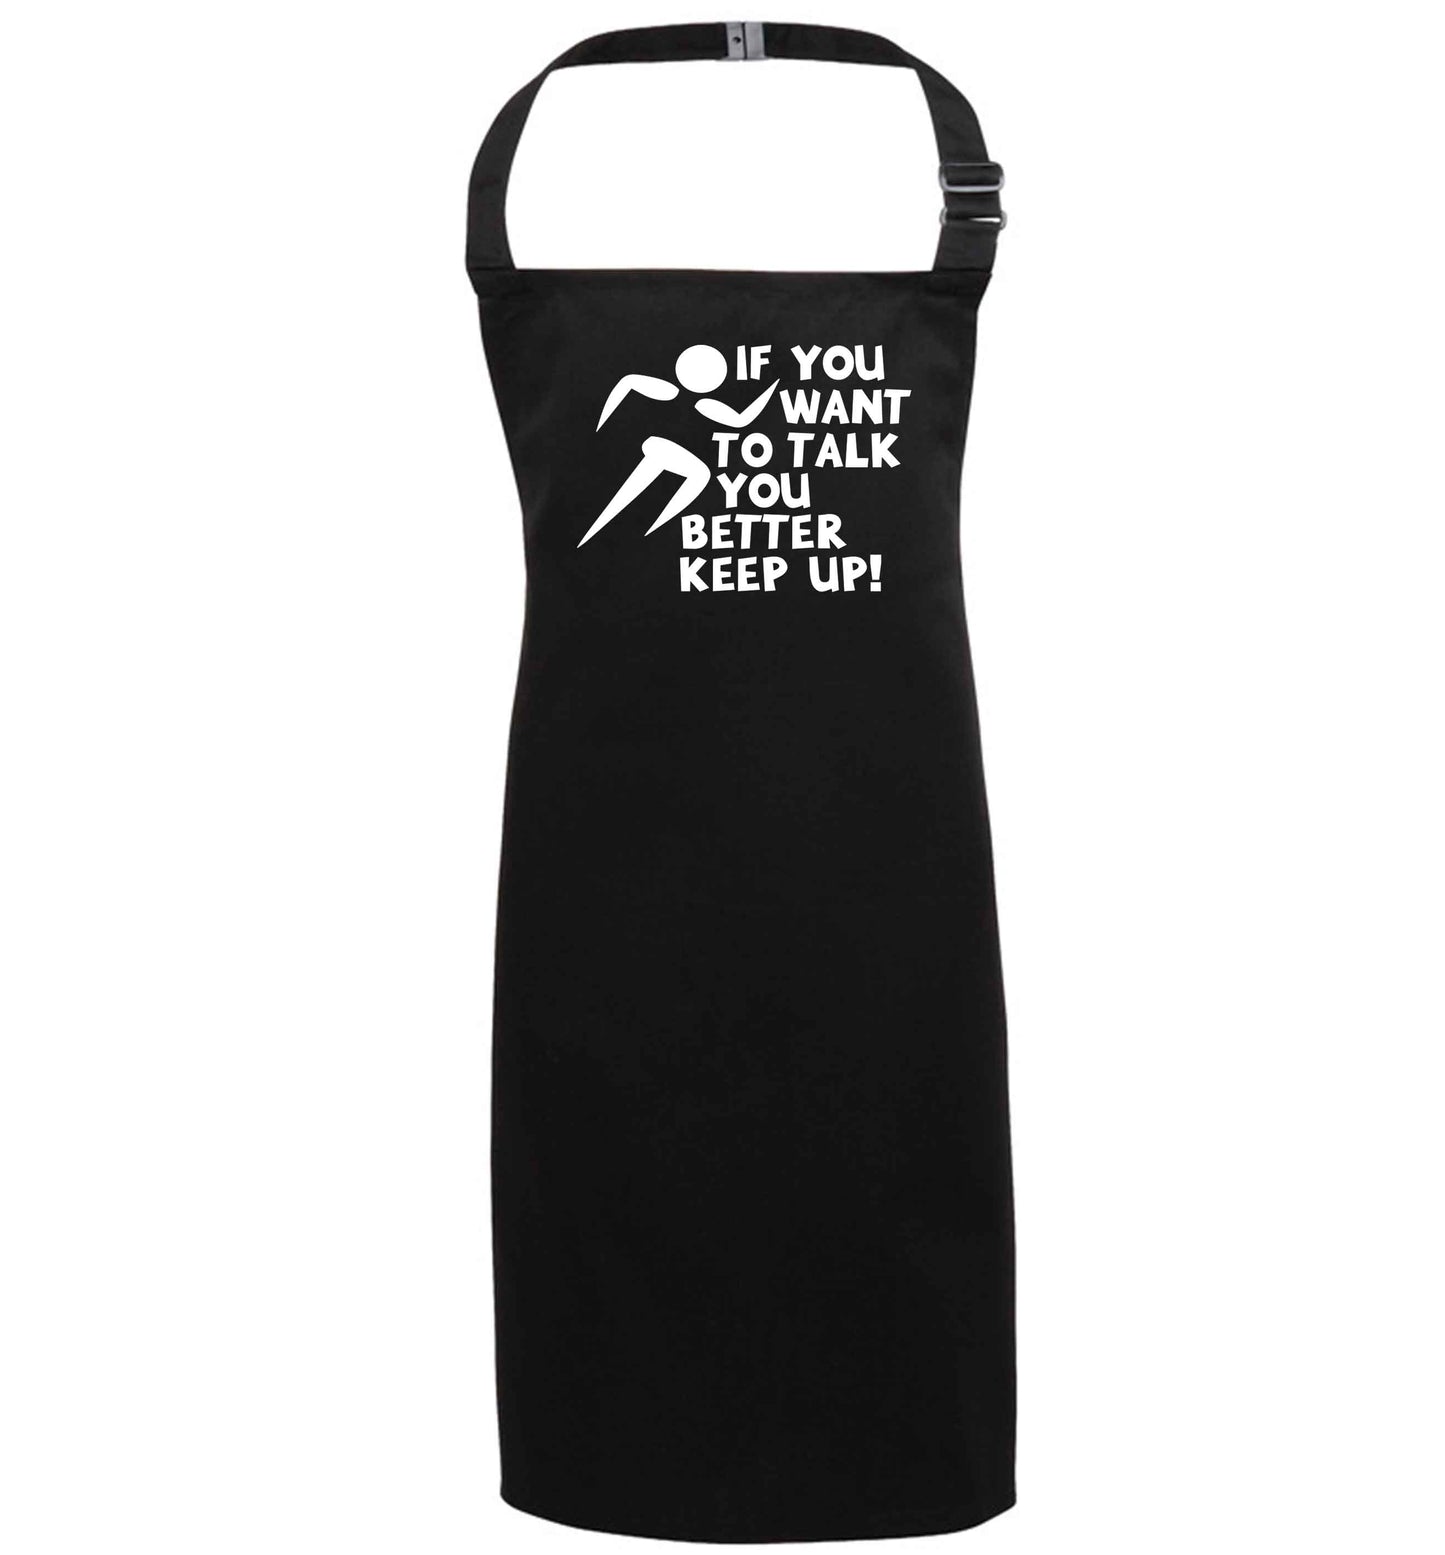 If you want to talk you better keep up! black apron 7-10 years